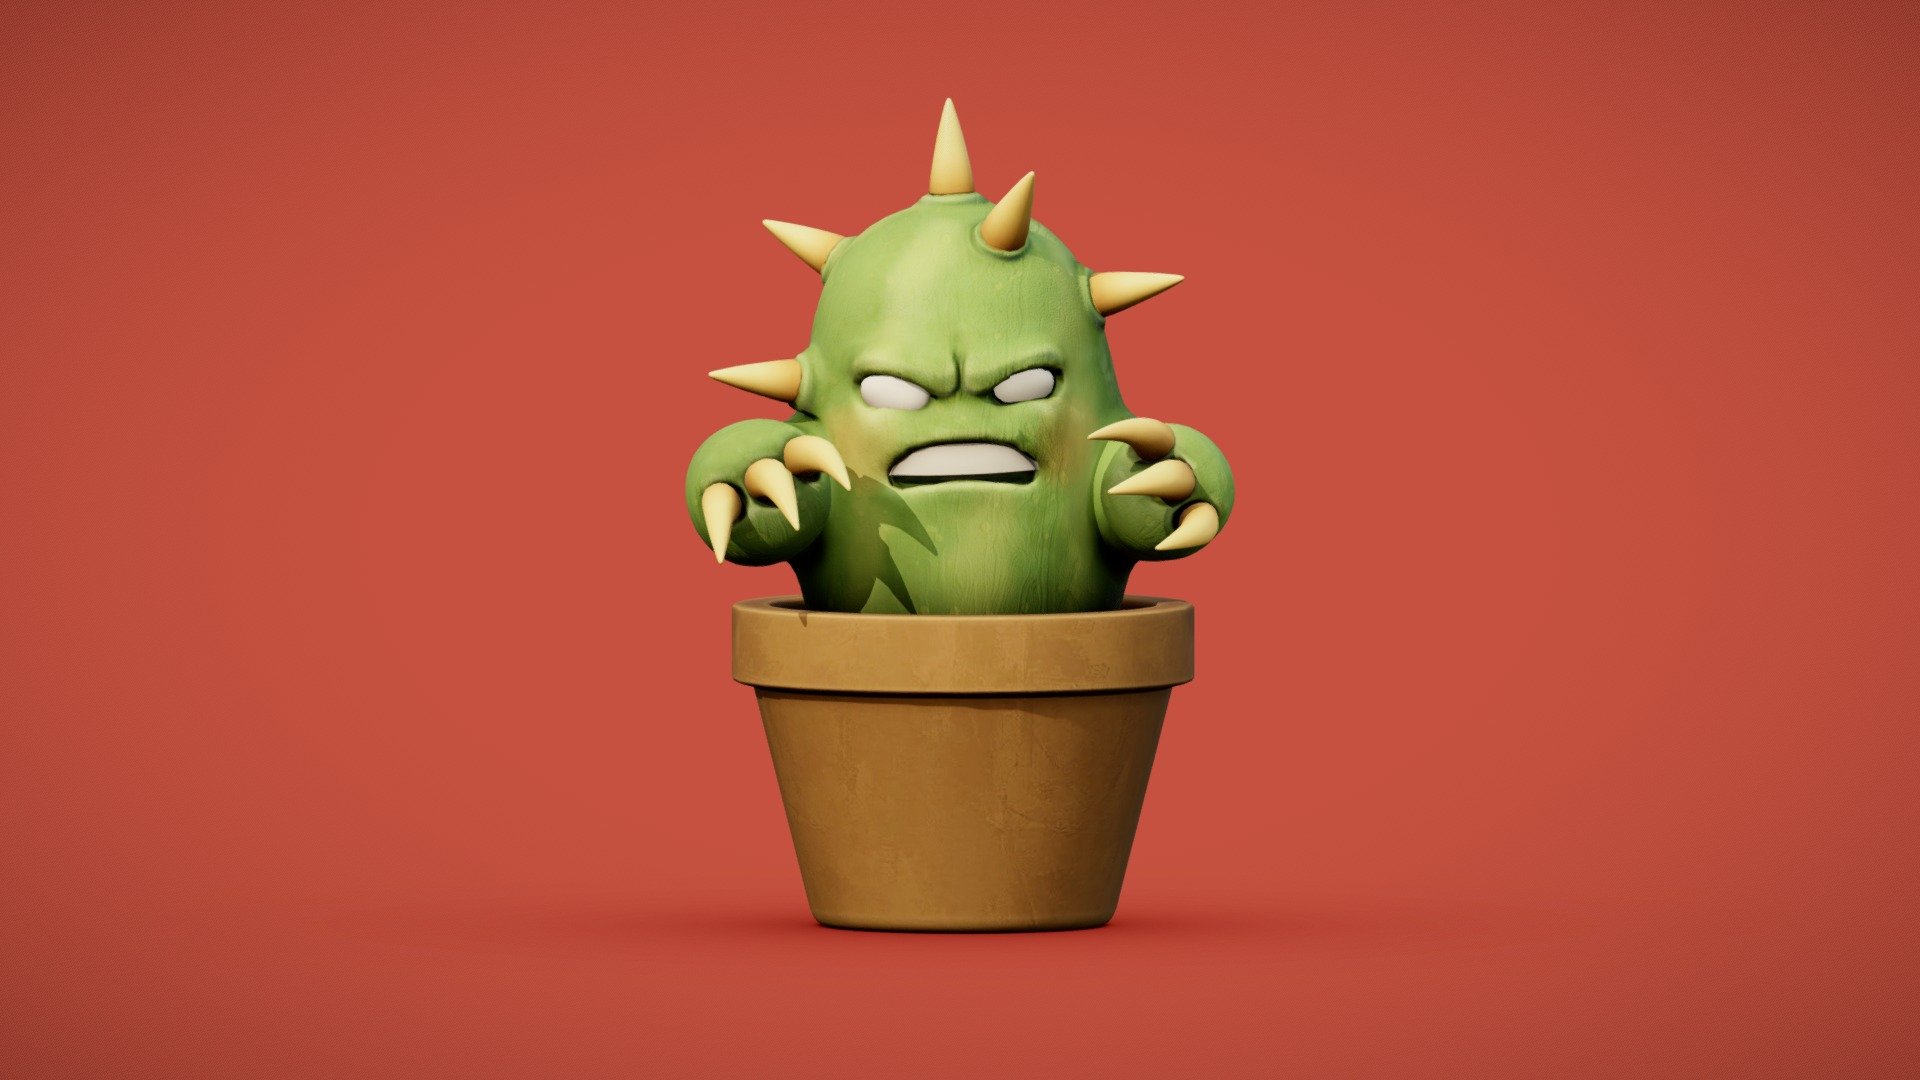 Angry Cactus for your renders and games

Rig Information:

Rigged mesh

Animation: none

Textures:

Diffuse color, Roughness, Normal, AO

All textures are 2K

Files Formats:

Blend

Fbx

Obj - Angry Cactus - Buy Royalty Free 3D model by Vanessa Araújo (@vanessa3d) 3d model